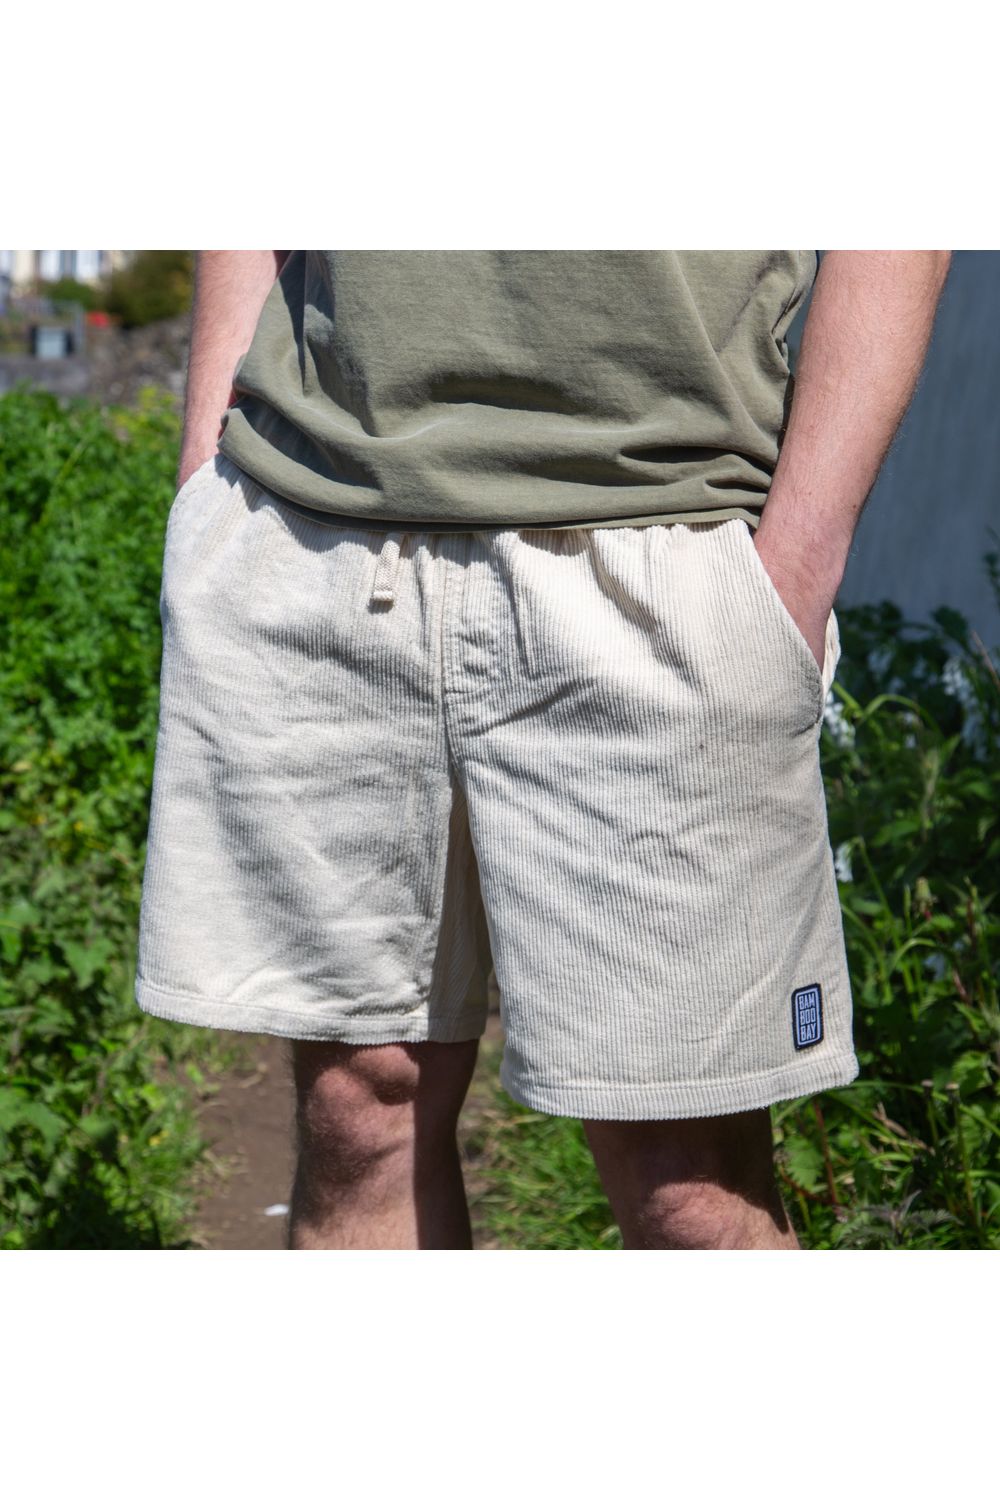 Bamboobay cord shorts in sand yellow front image